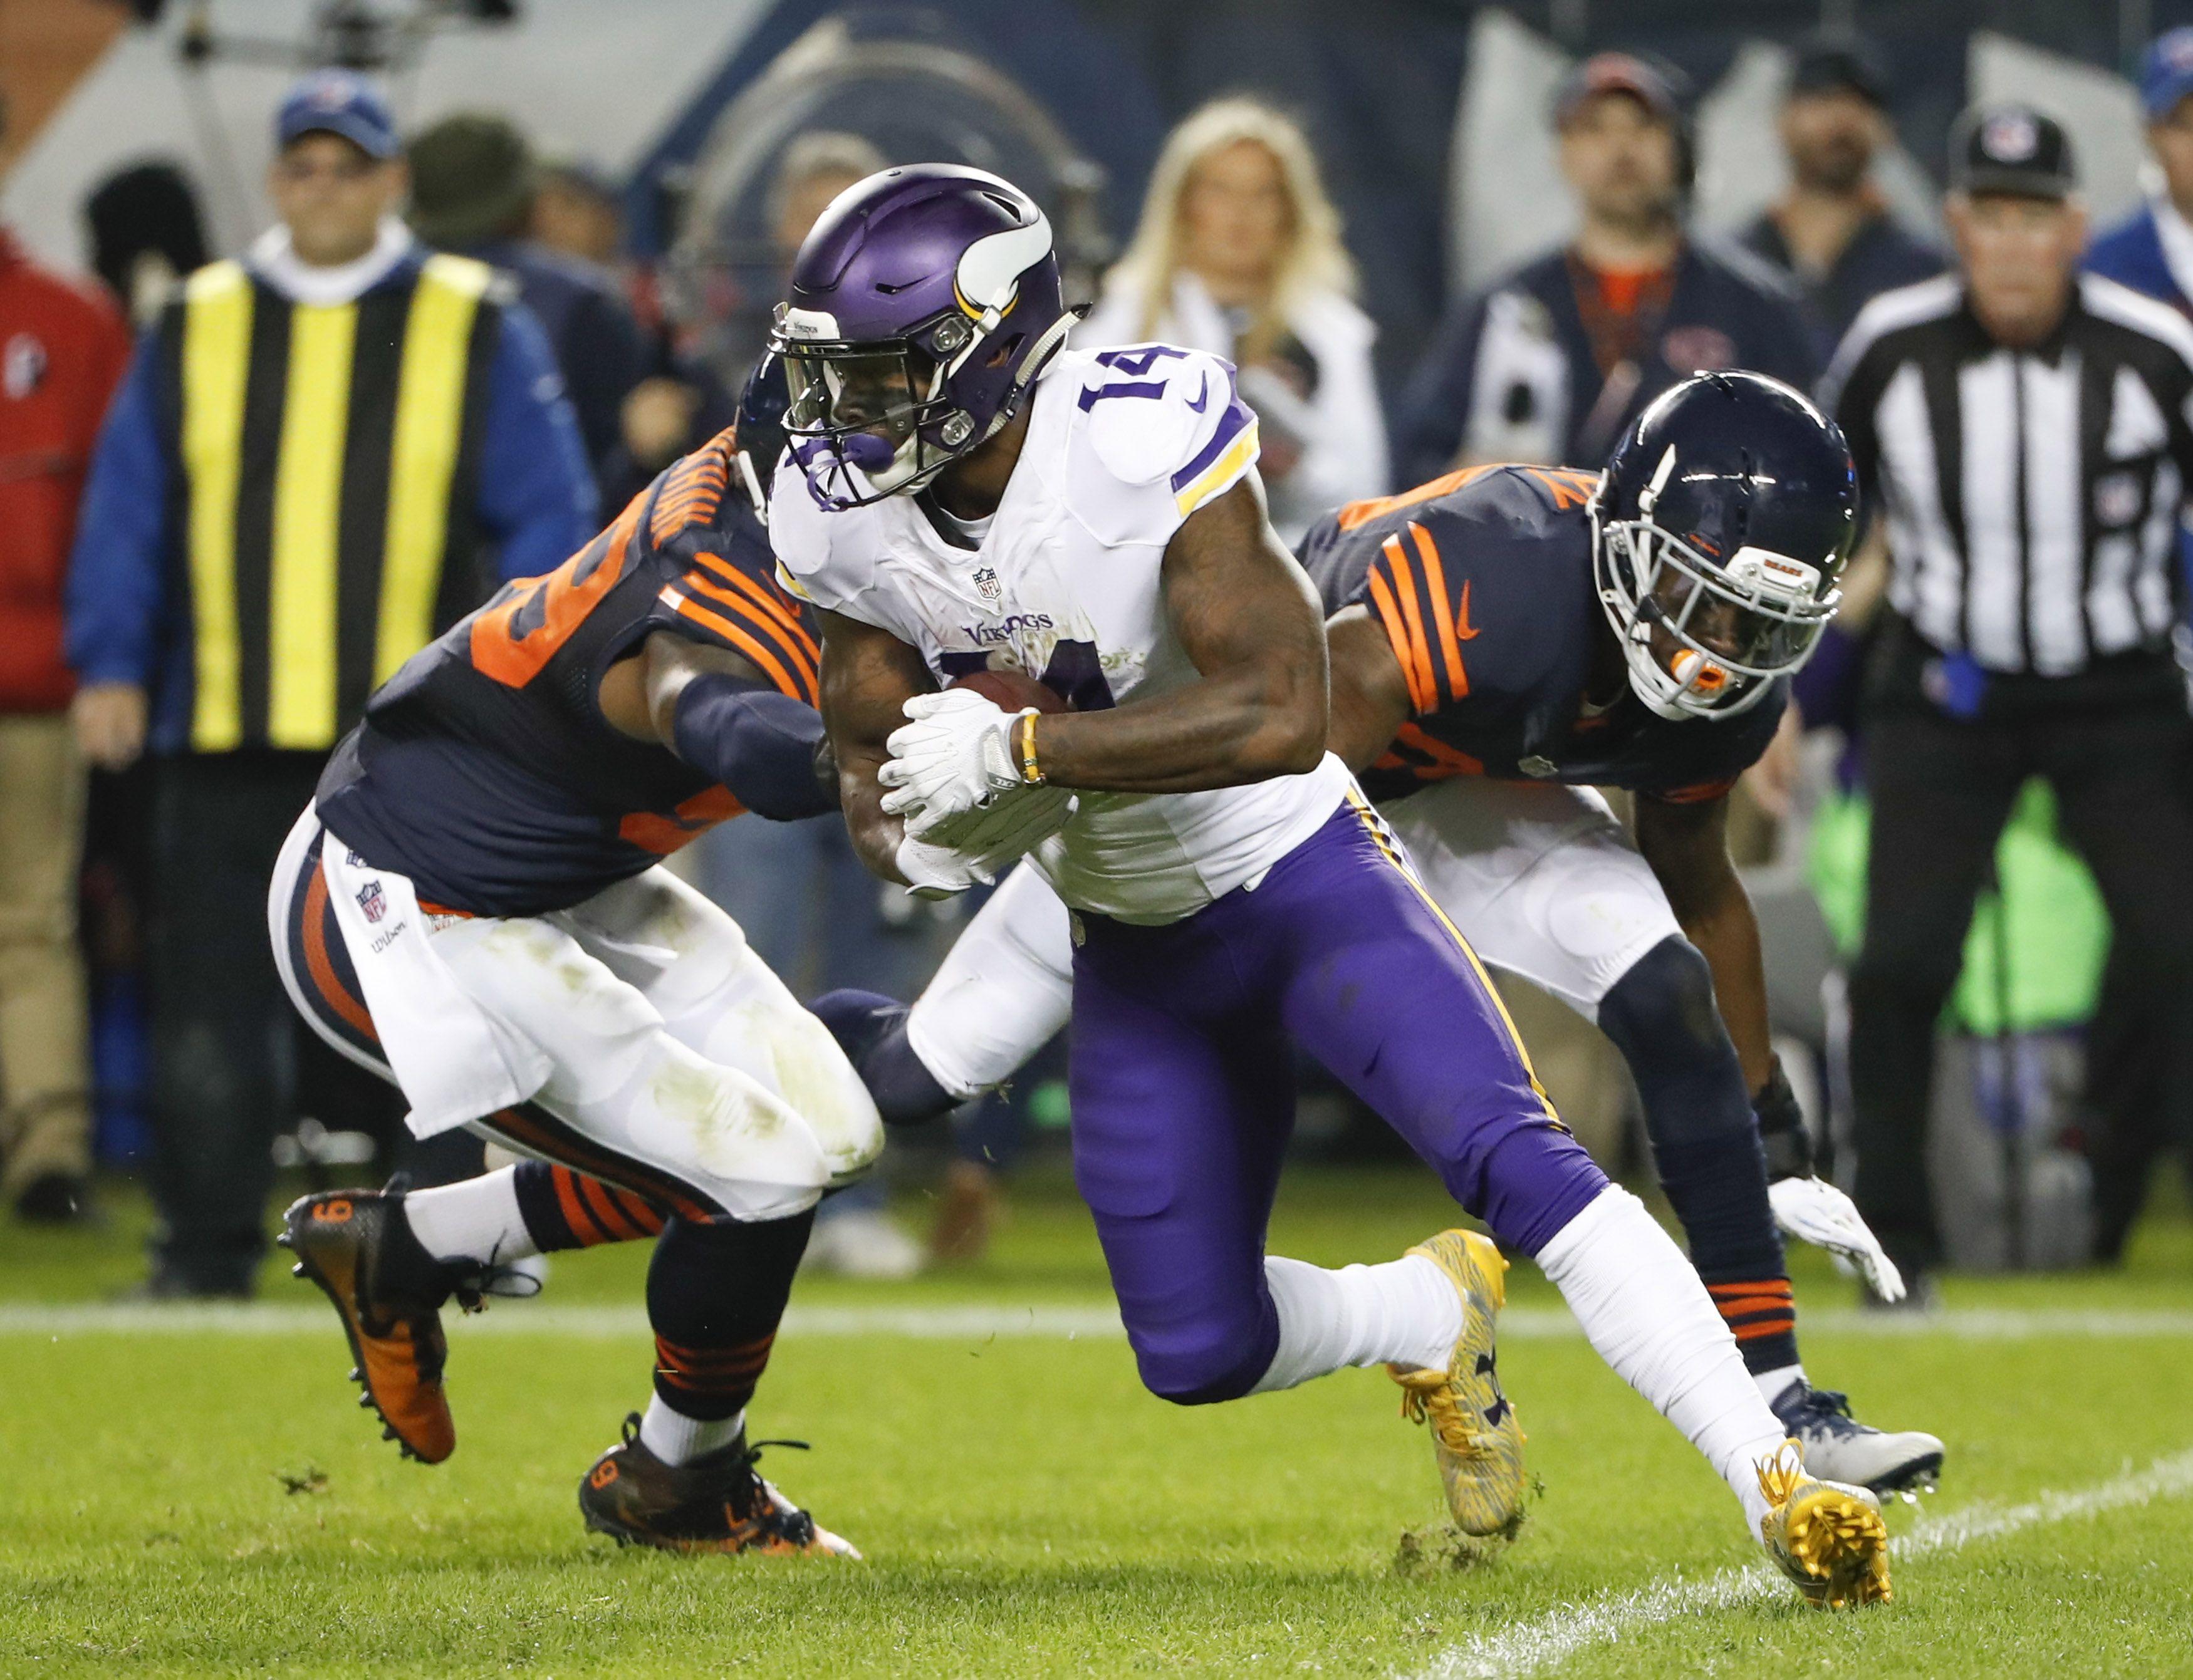 WATCH: Vikings receiver Stefon Diggs destroys the competition back